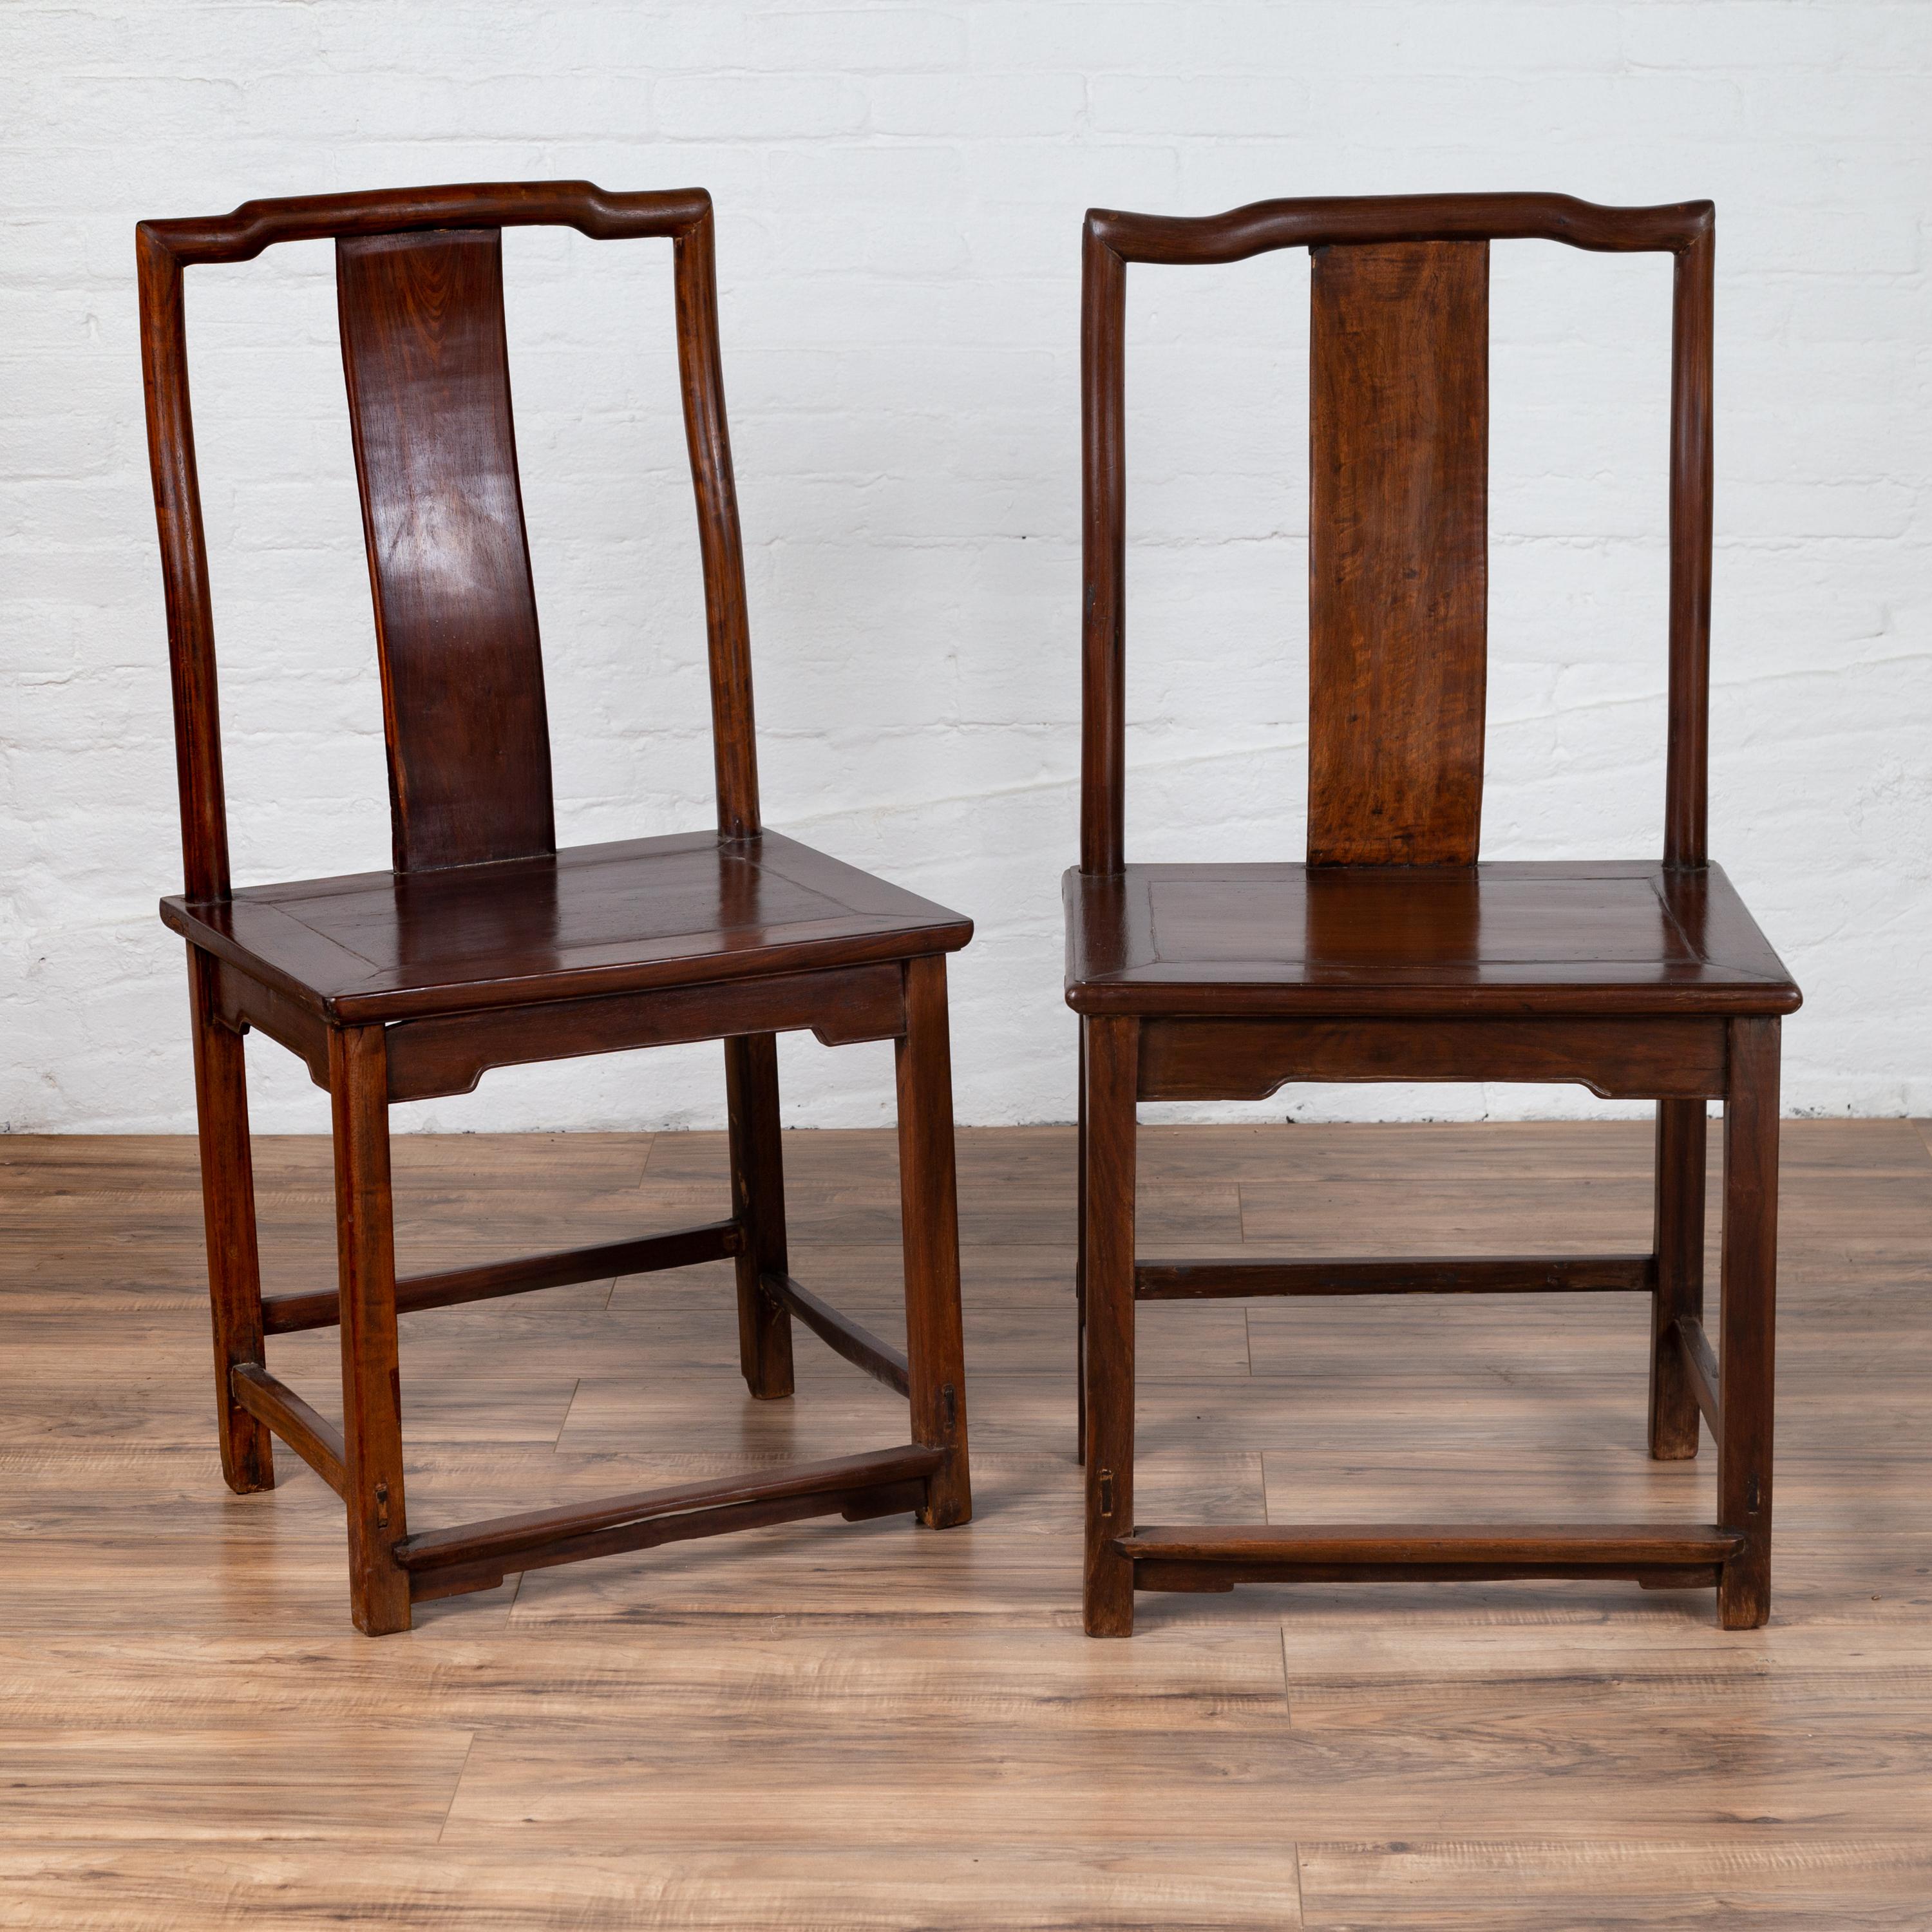 A pair of antique Chinese elmwood scholar's ceremonial chairs from the early 20th century, with dark patina and sinuous back splats. We have several chairs available with slight variations. Contact us for more info. Born in China during the early